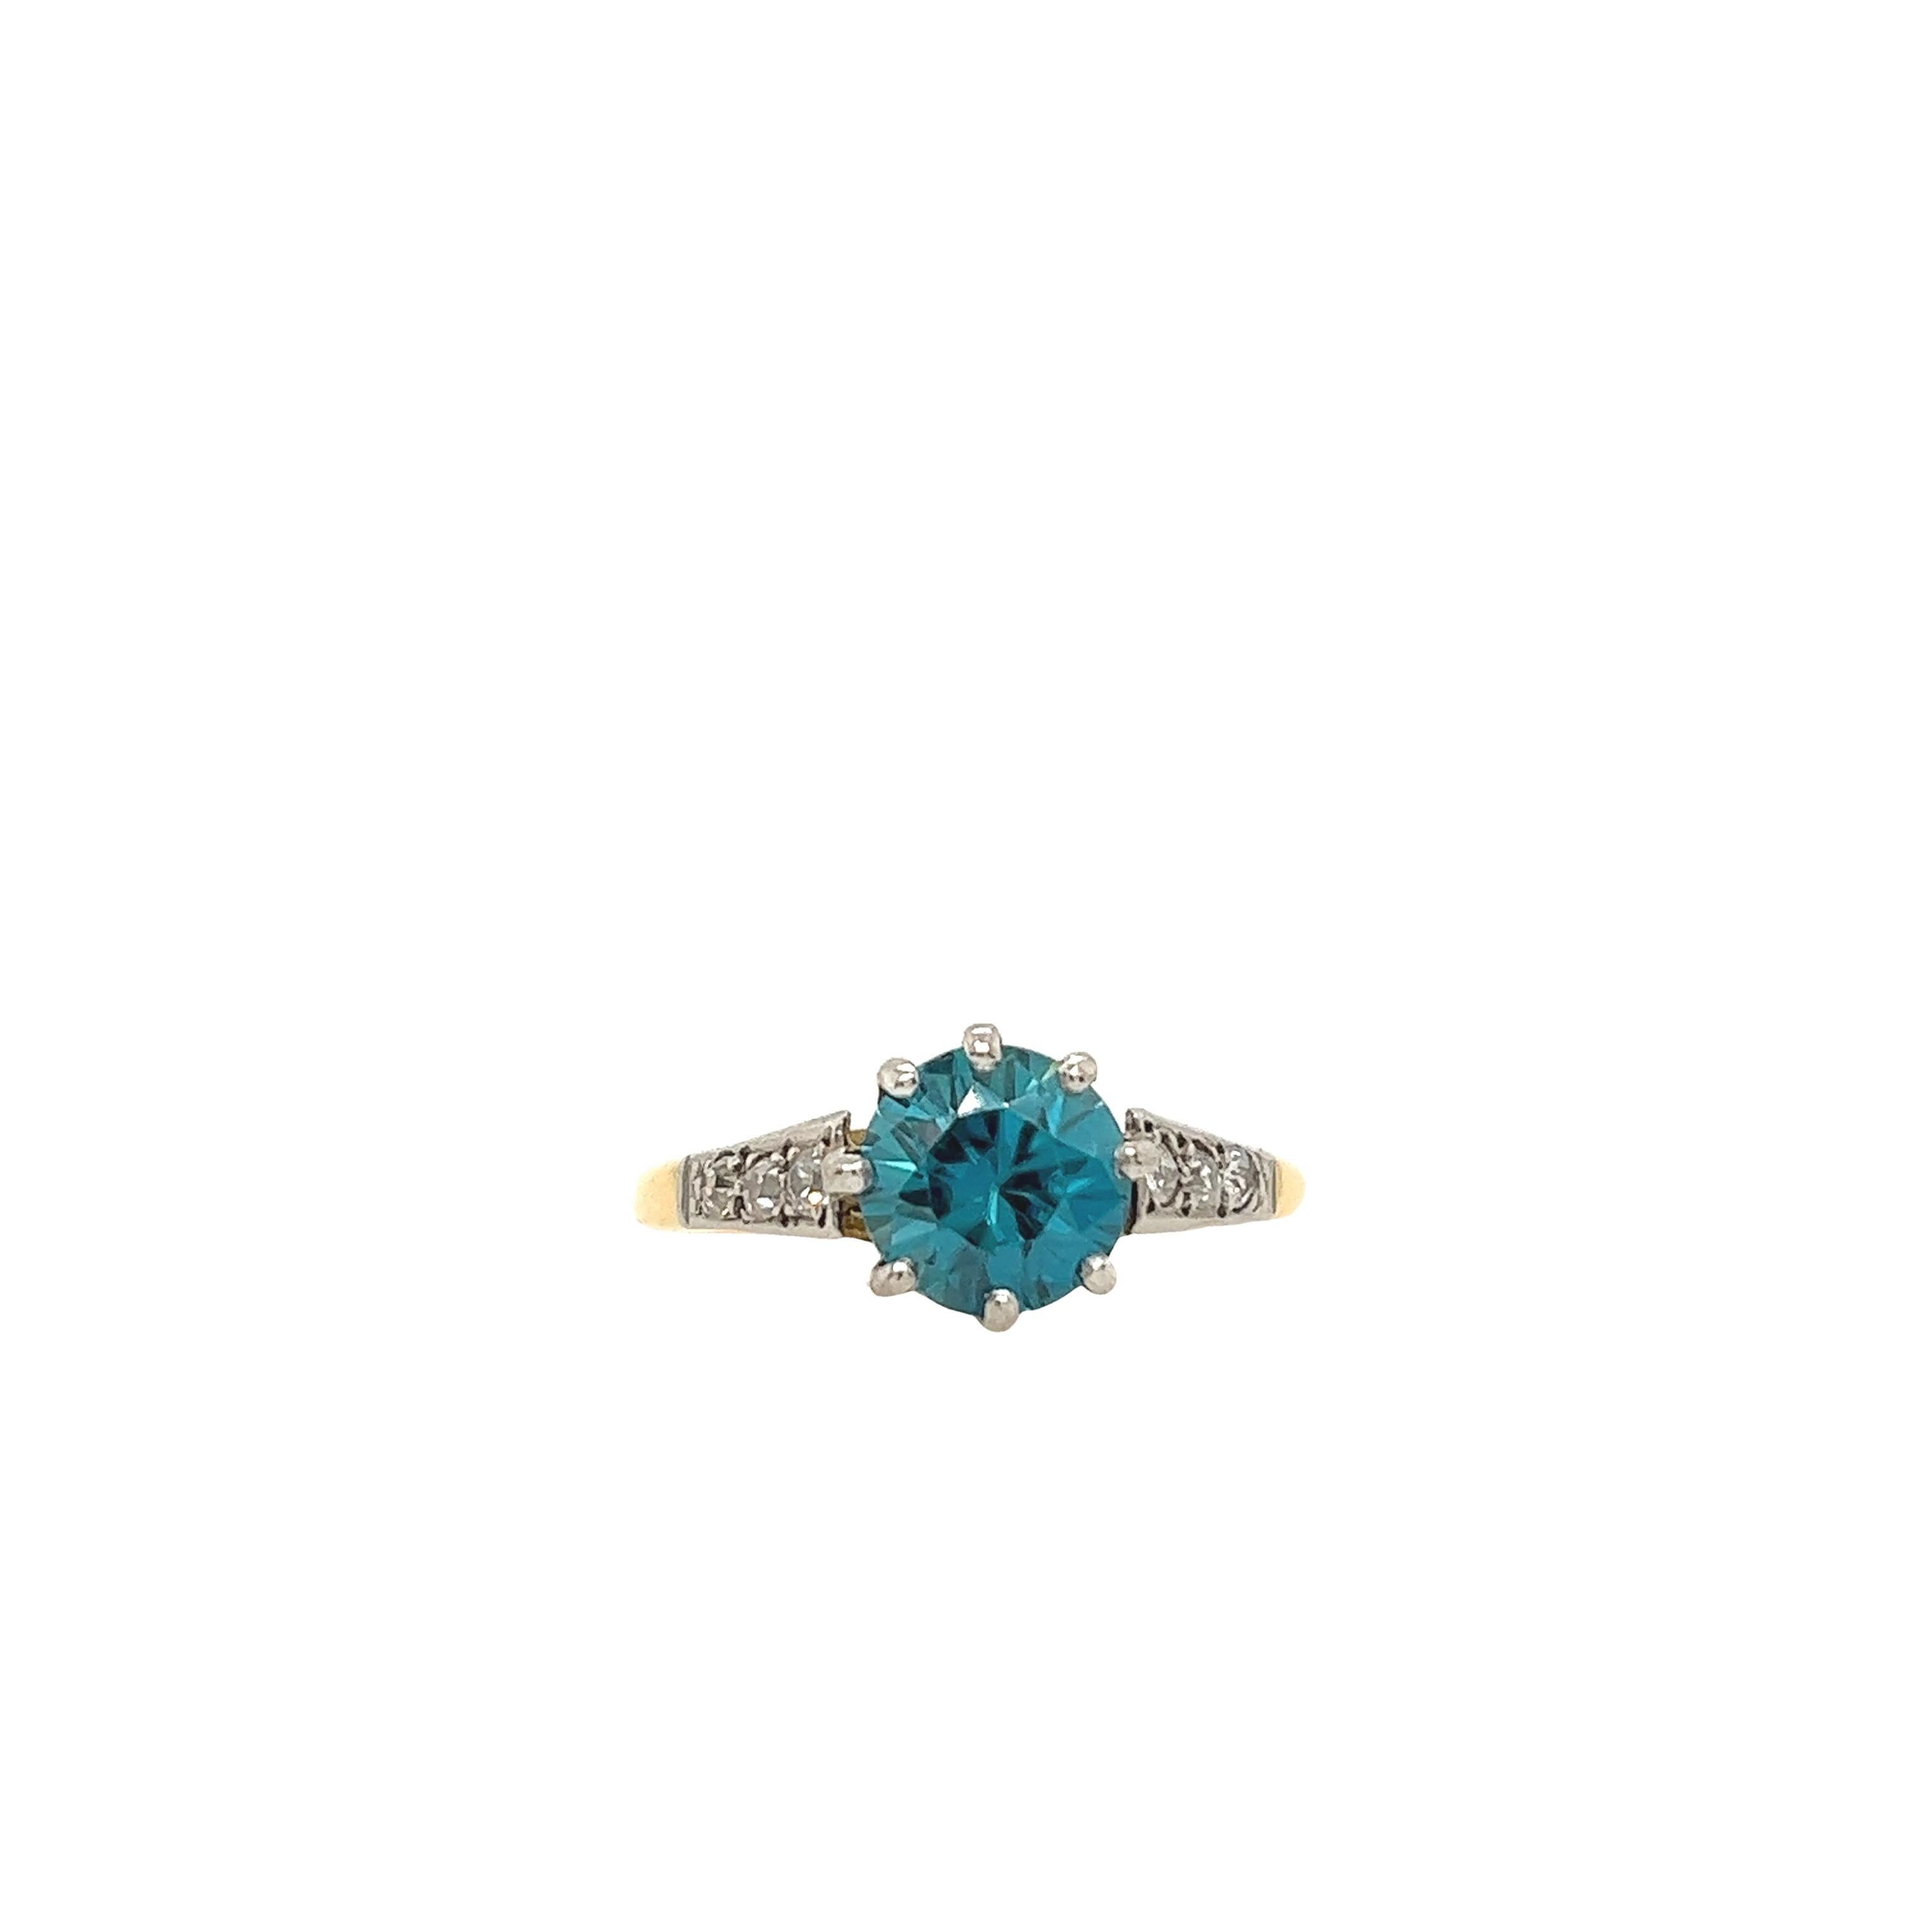 Classic fine quality London blue topaz ring with 6 rose cut diamonds on the shoulders. Total diamond weight is 0.12ct.  Set in exquisite 18ct yellow and white gold.

Total Weight: 3.5g
Ring Size: L1/2
Width of Band: 1.47mm
Width of Head: